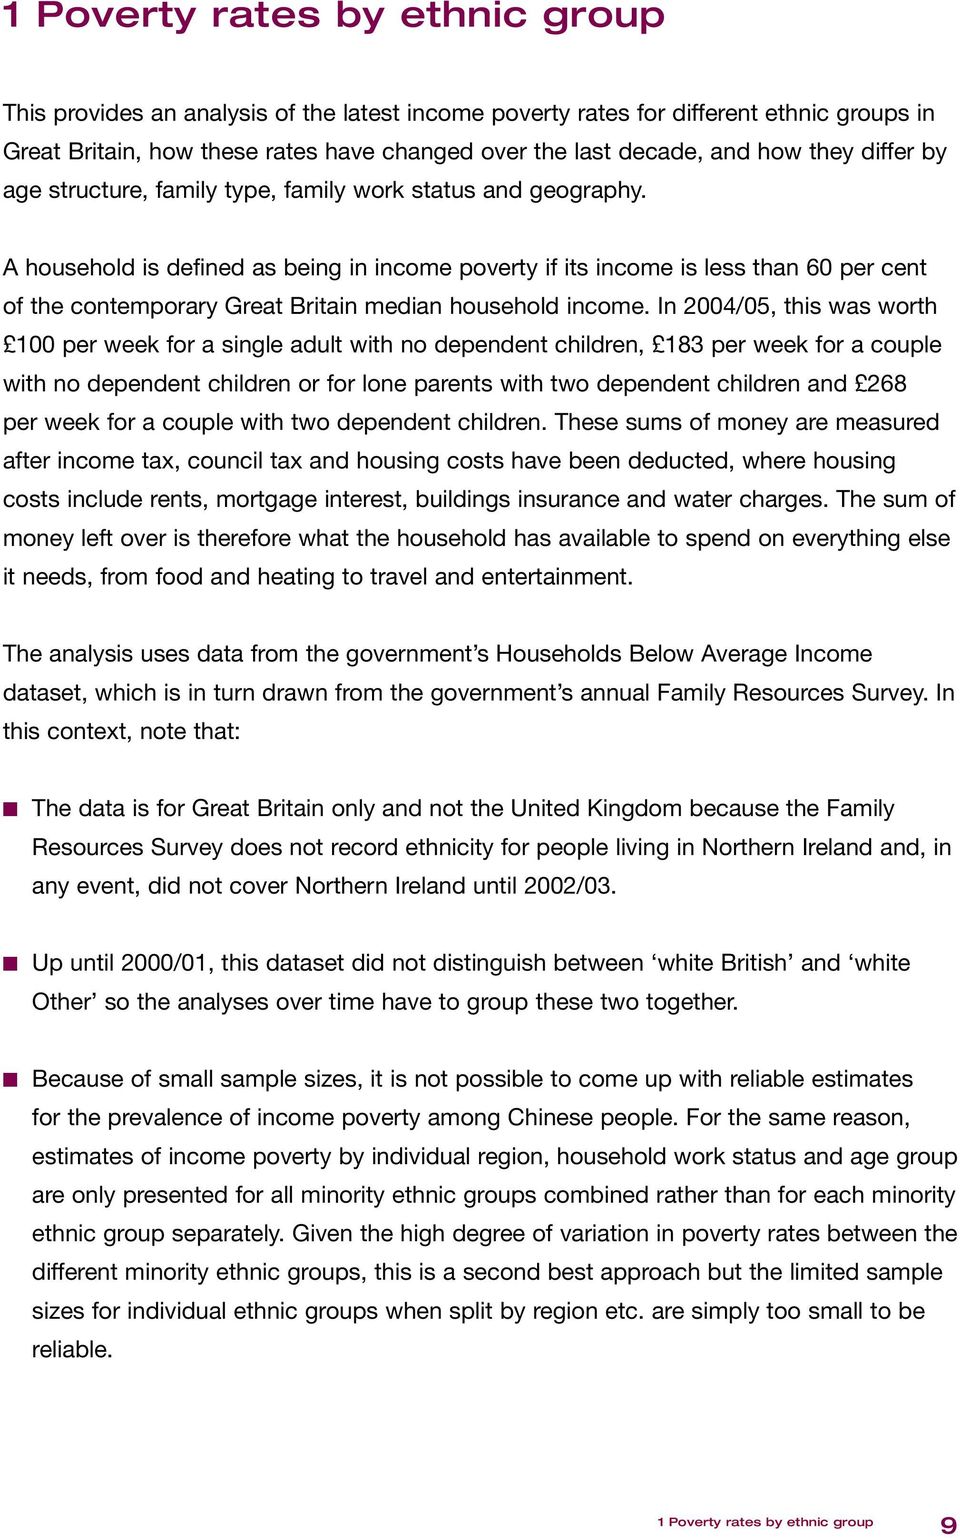 A household is defined as being in income poverty if its income is less than 60 per cent of the contemporary Great Britain median household income.